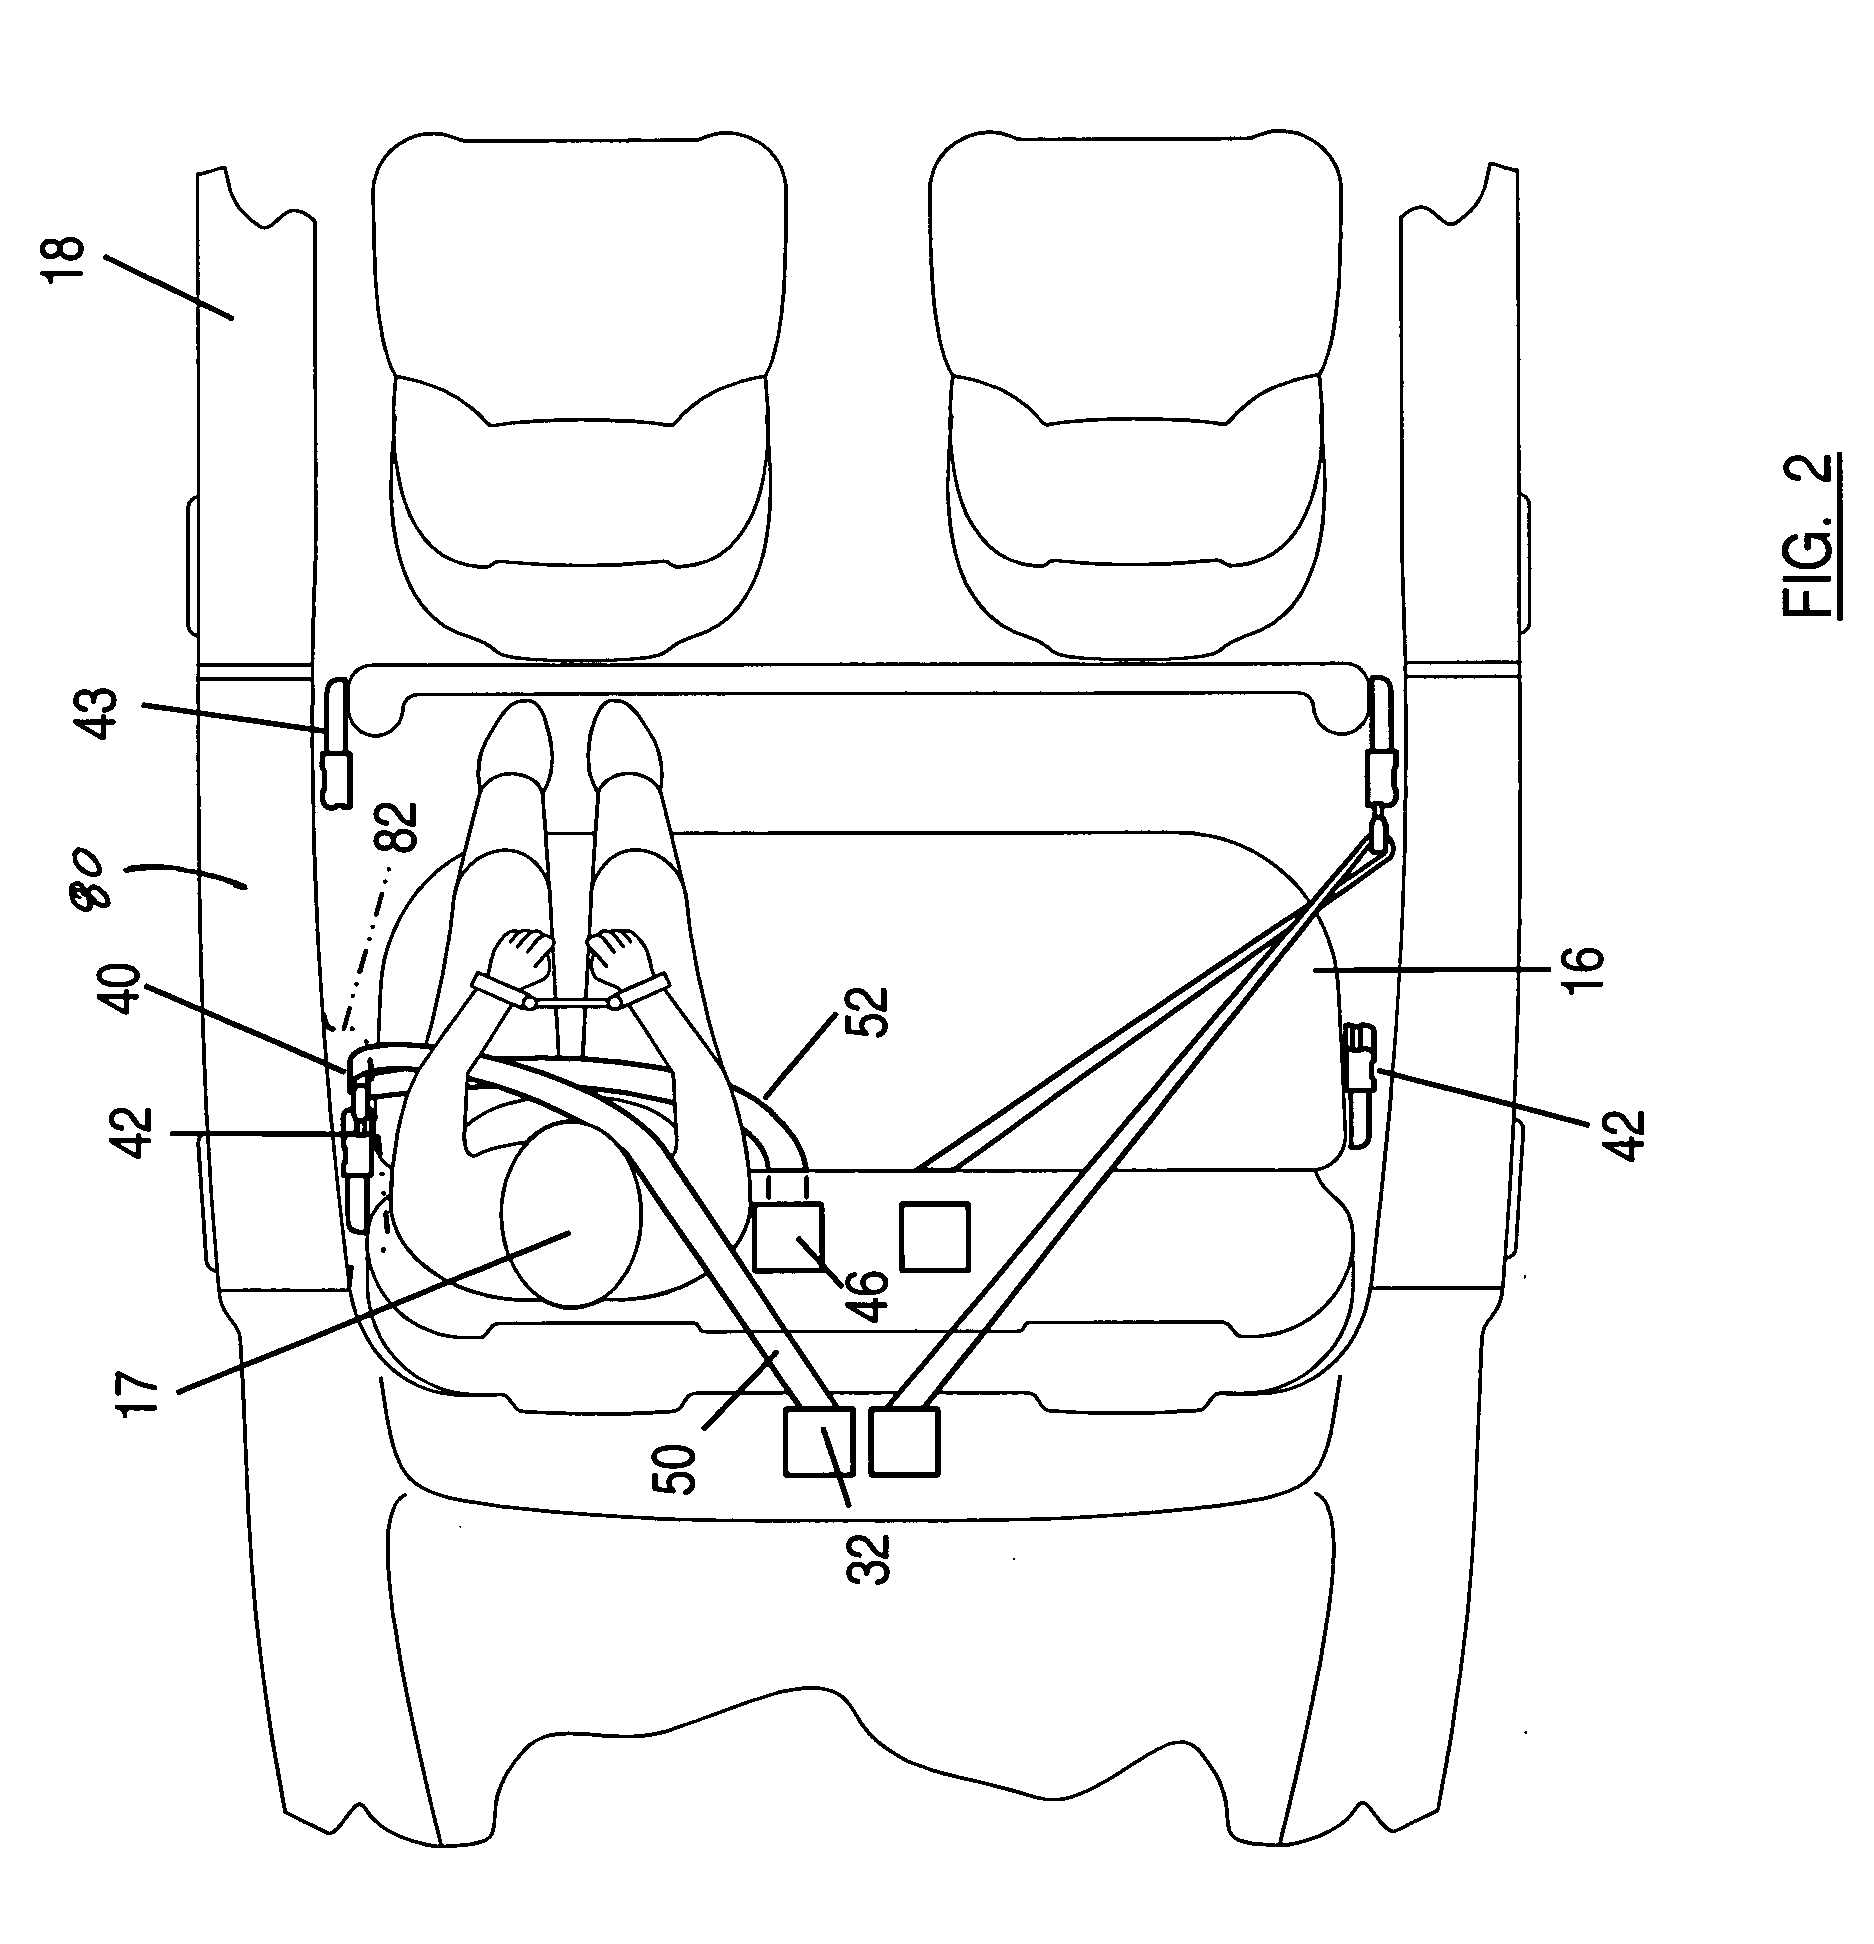 Safety restraint device for police vehicle